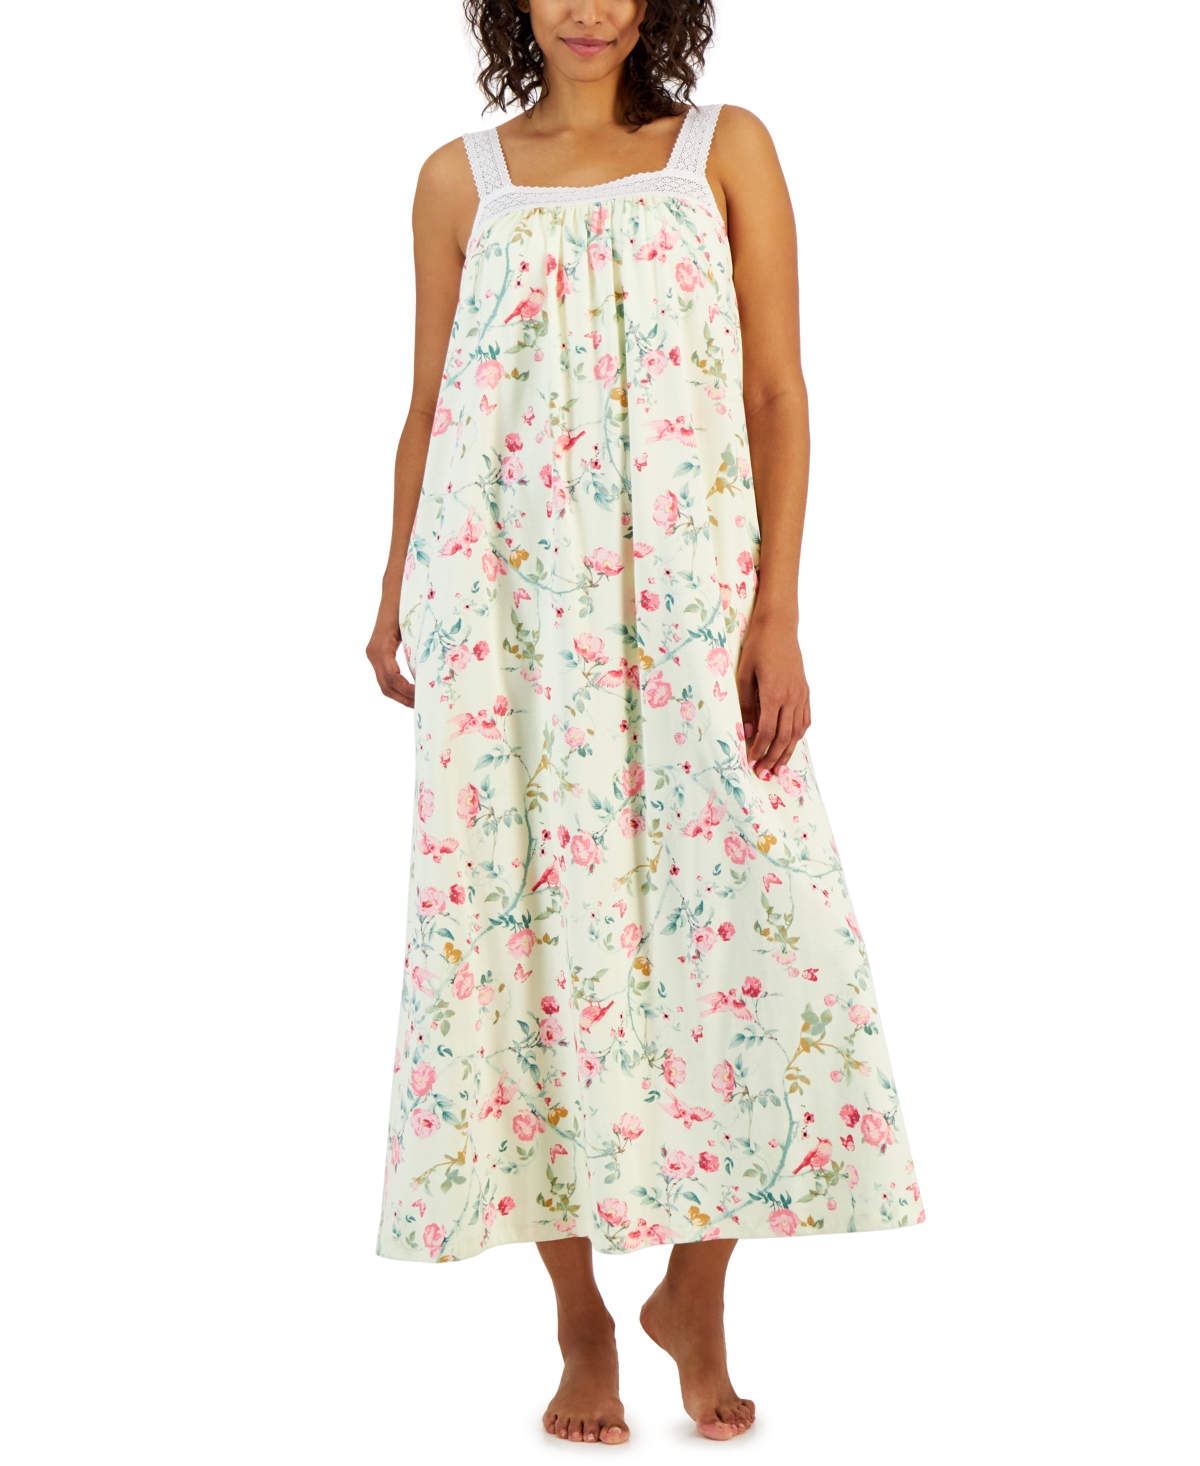 Women's Cotton Floral Lace-Trim Nightgown, Created for Macy's - Butterfly Paisley